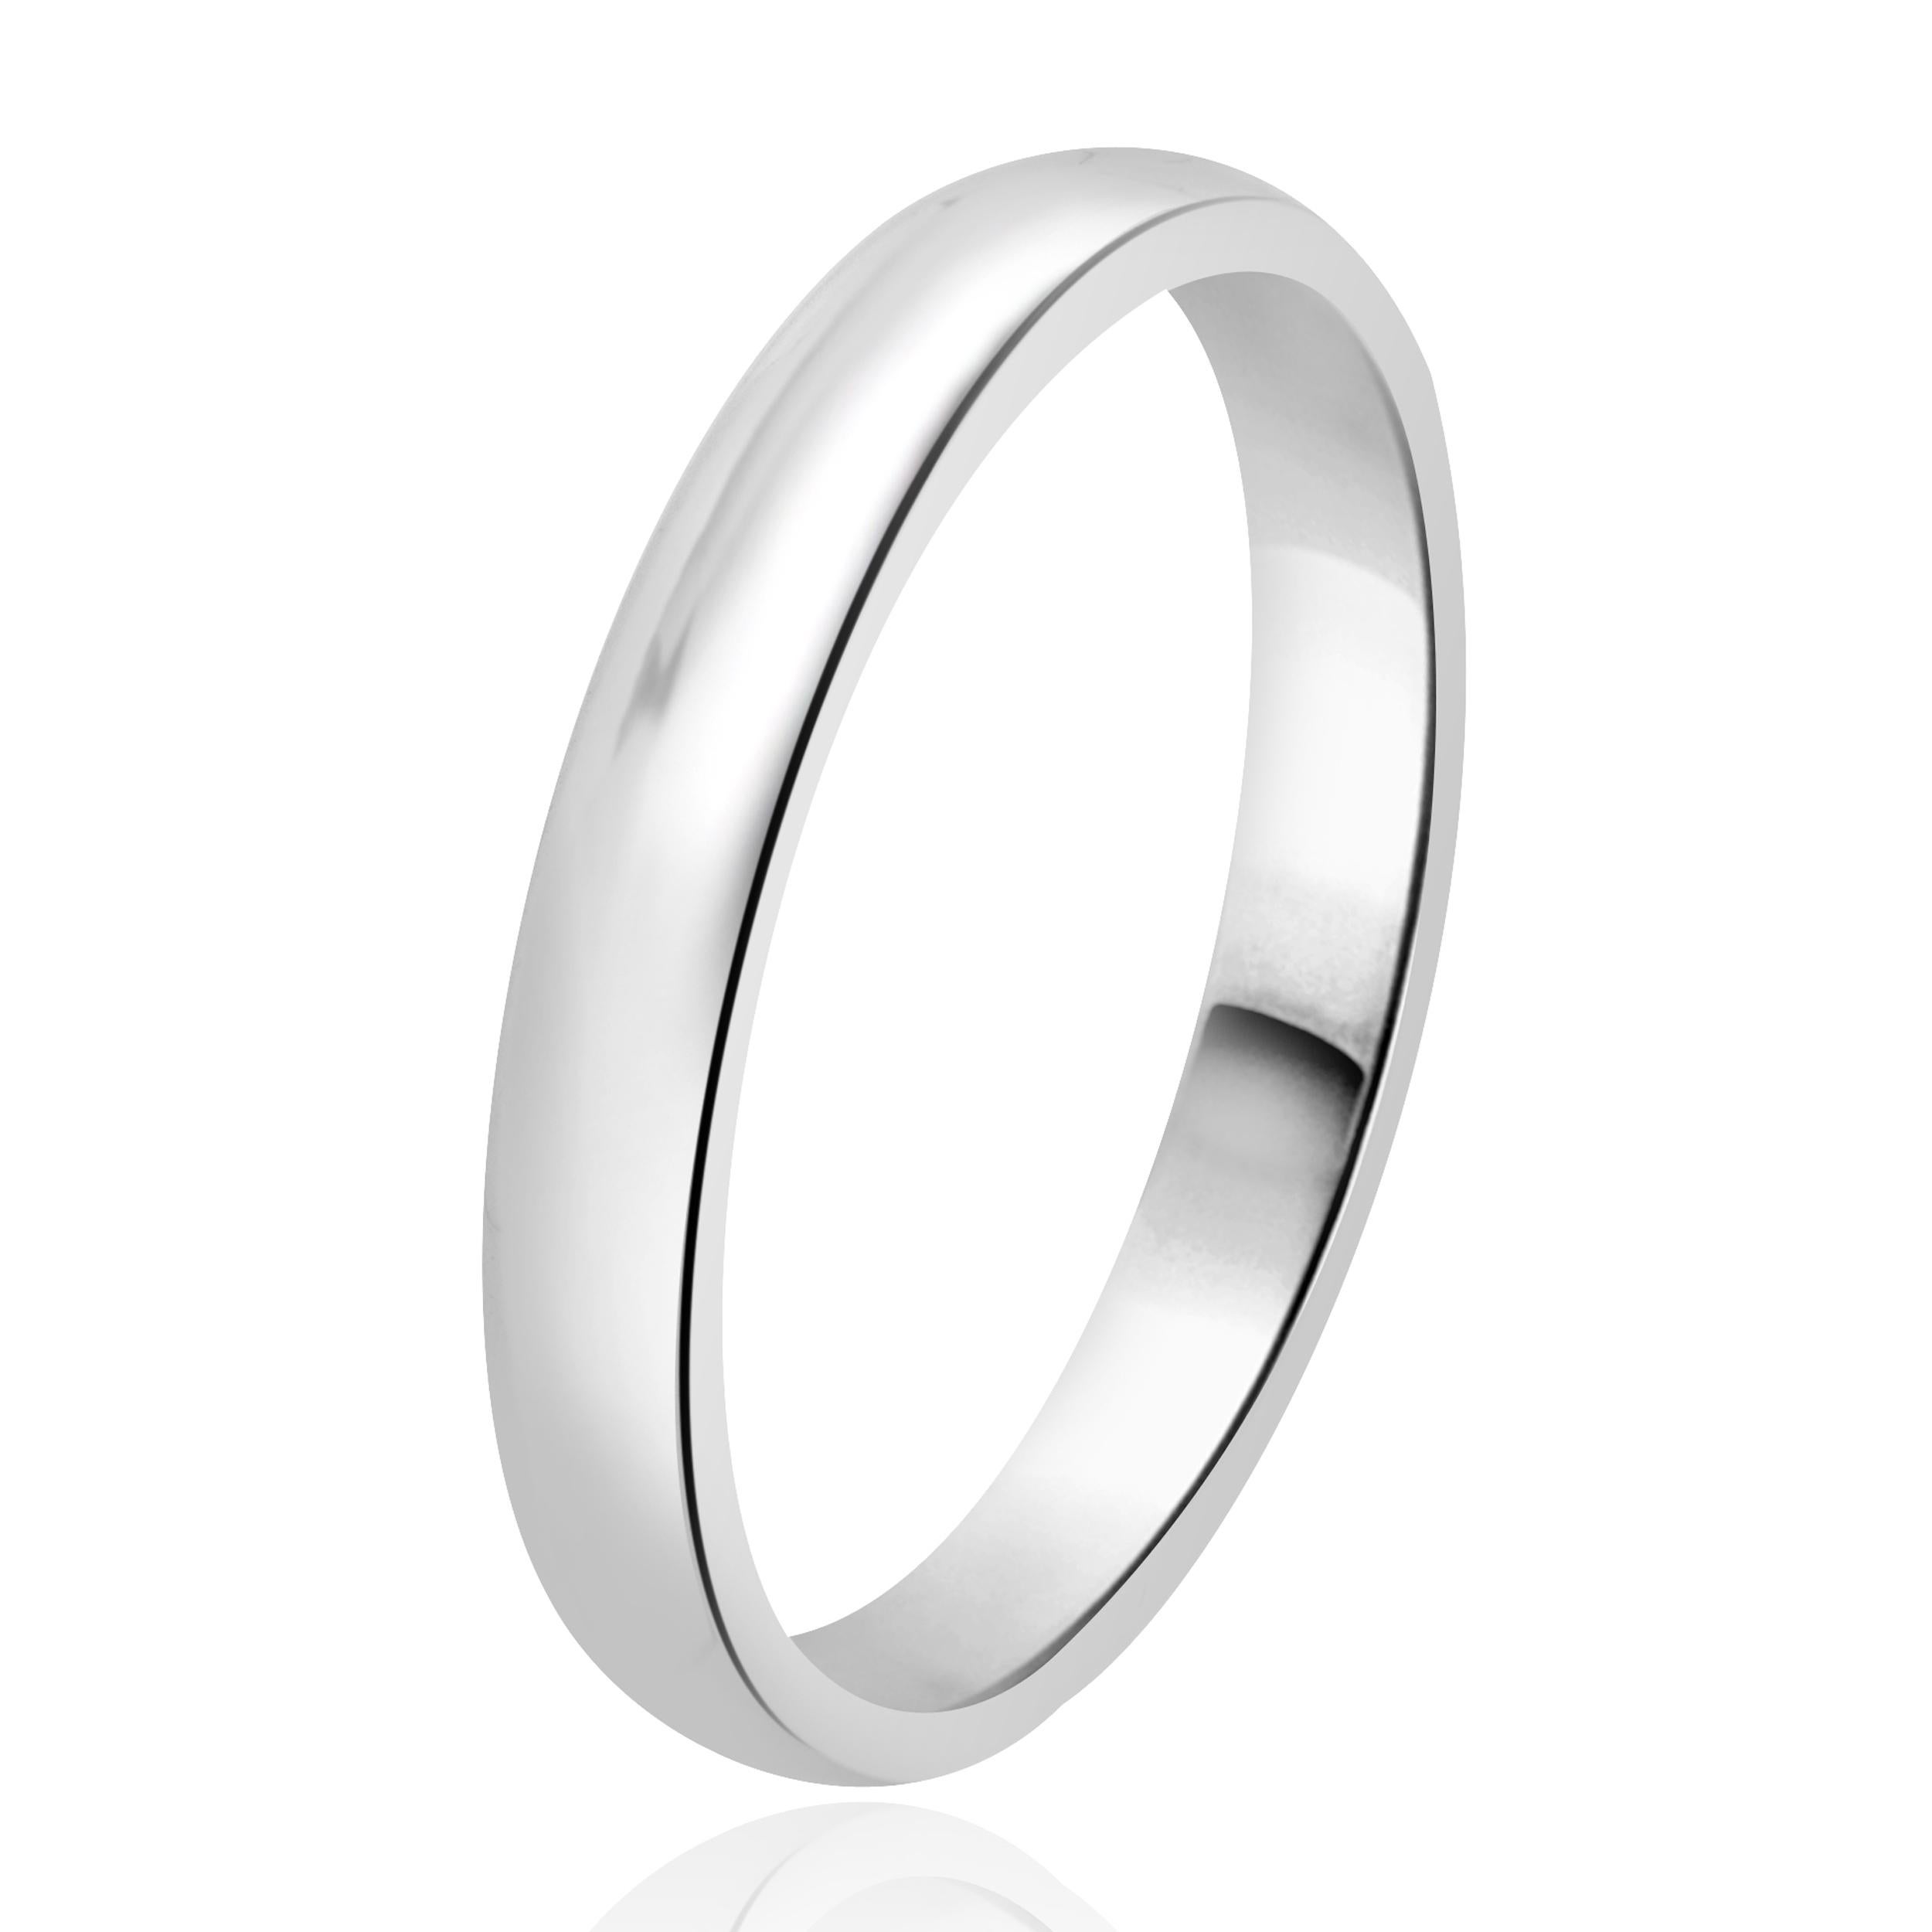 Designer: custom
Material: 14K white gold 
Dimensions: ring measures 2.70mm wide
Weight: 1.92 grams
Size: 6 (complimentary sizing available) 
